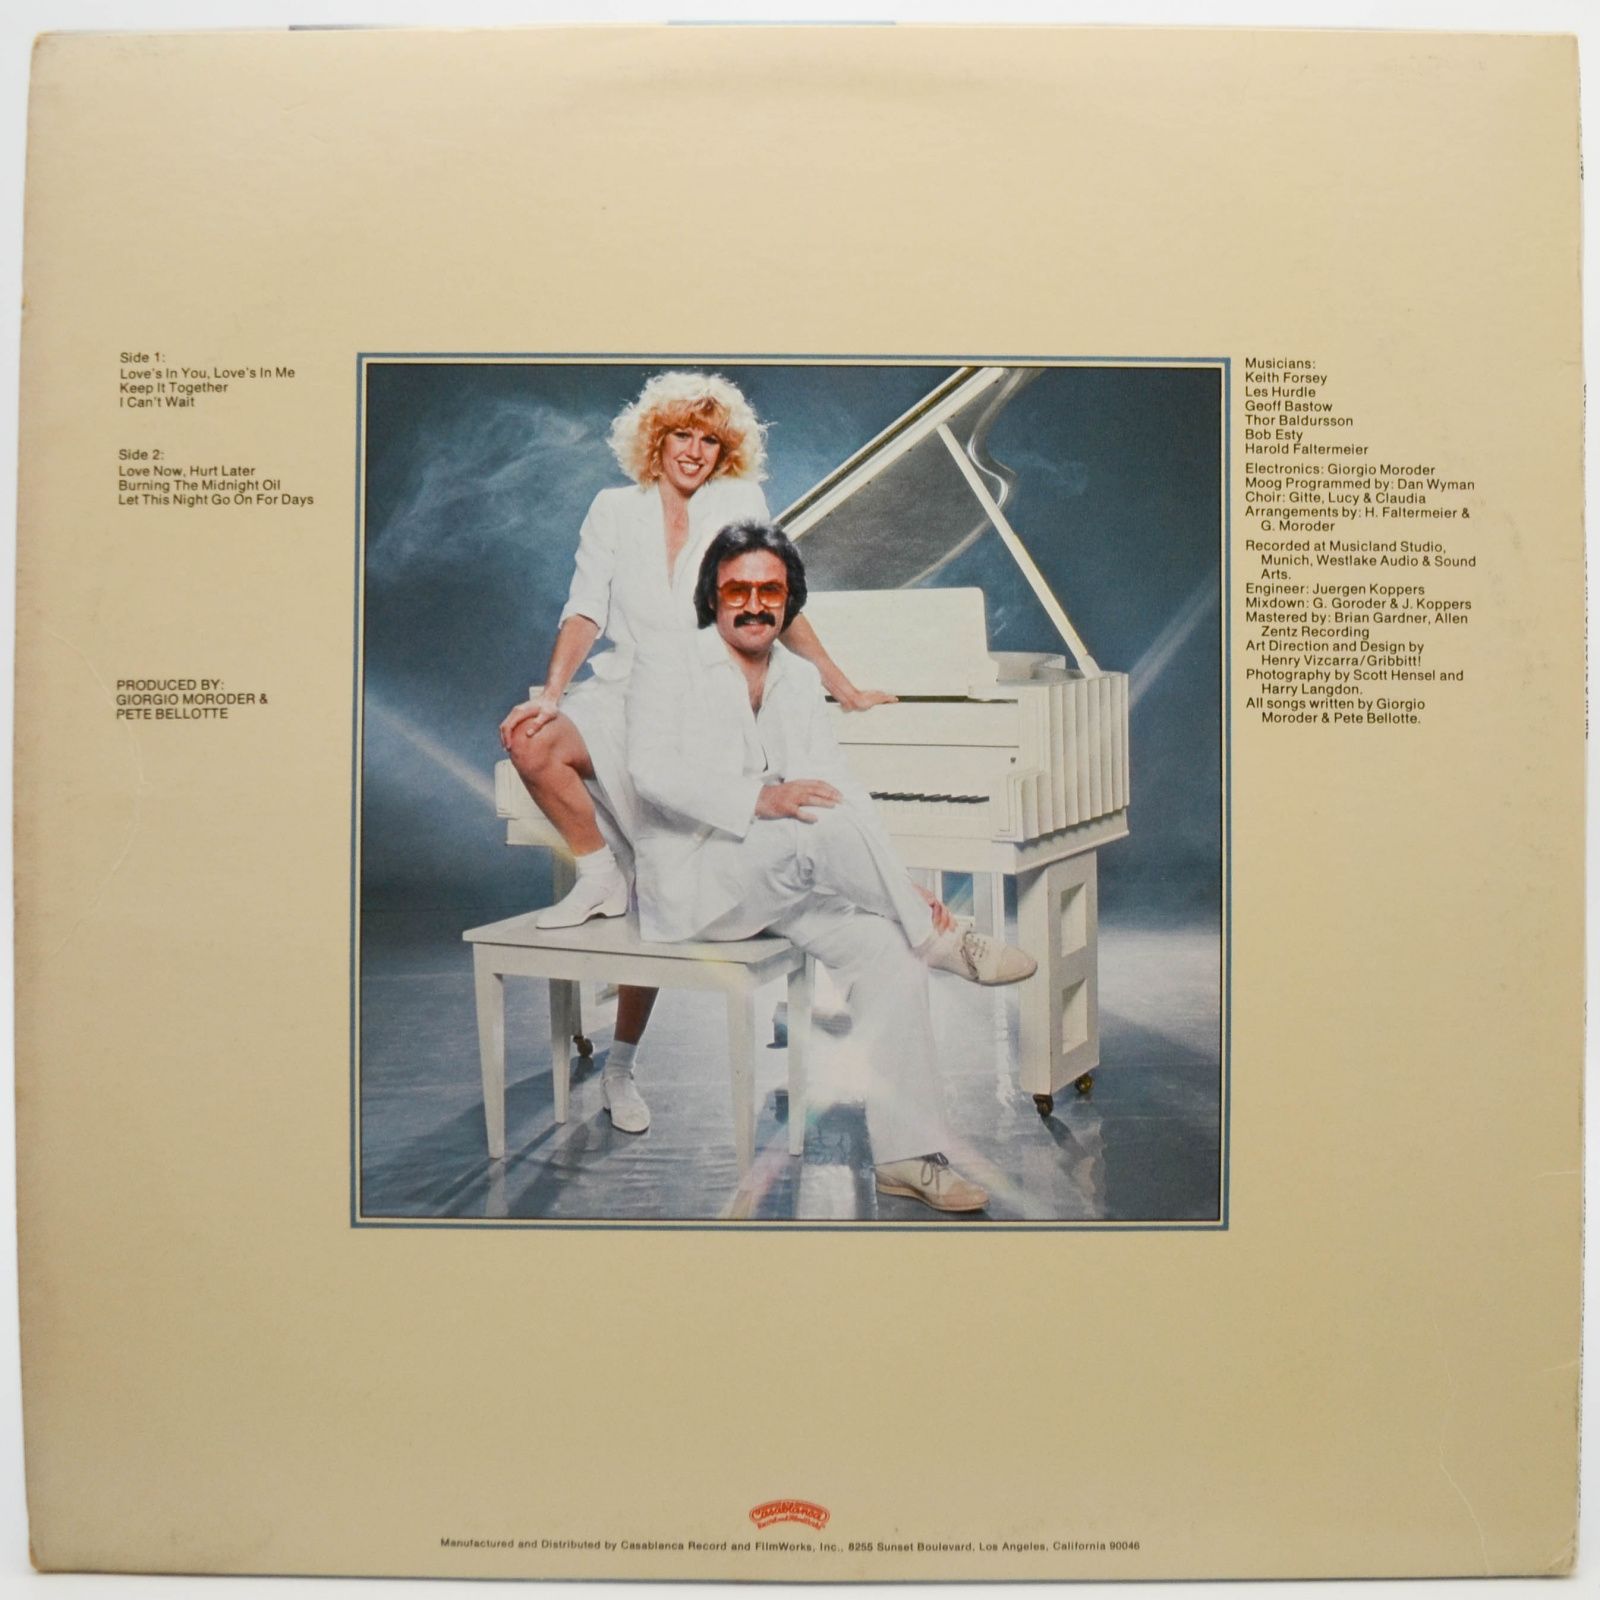 Giorgio And Chris — Love's In You, Love's In Me (1-st, USA), 1978